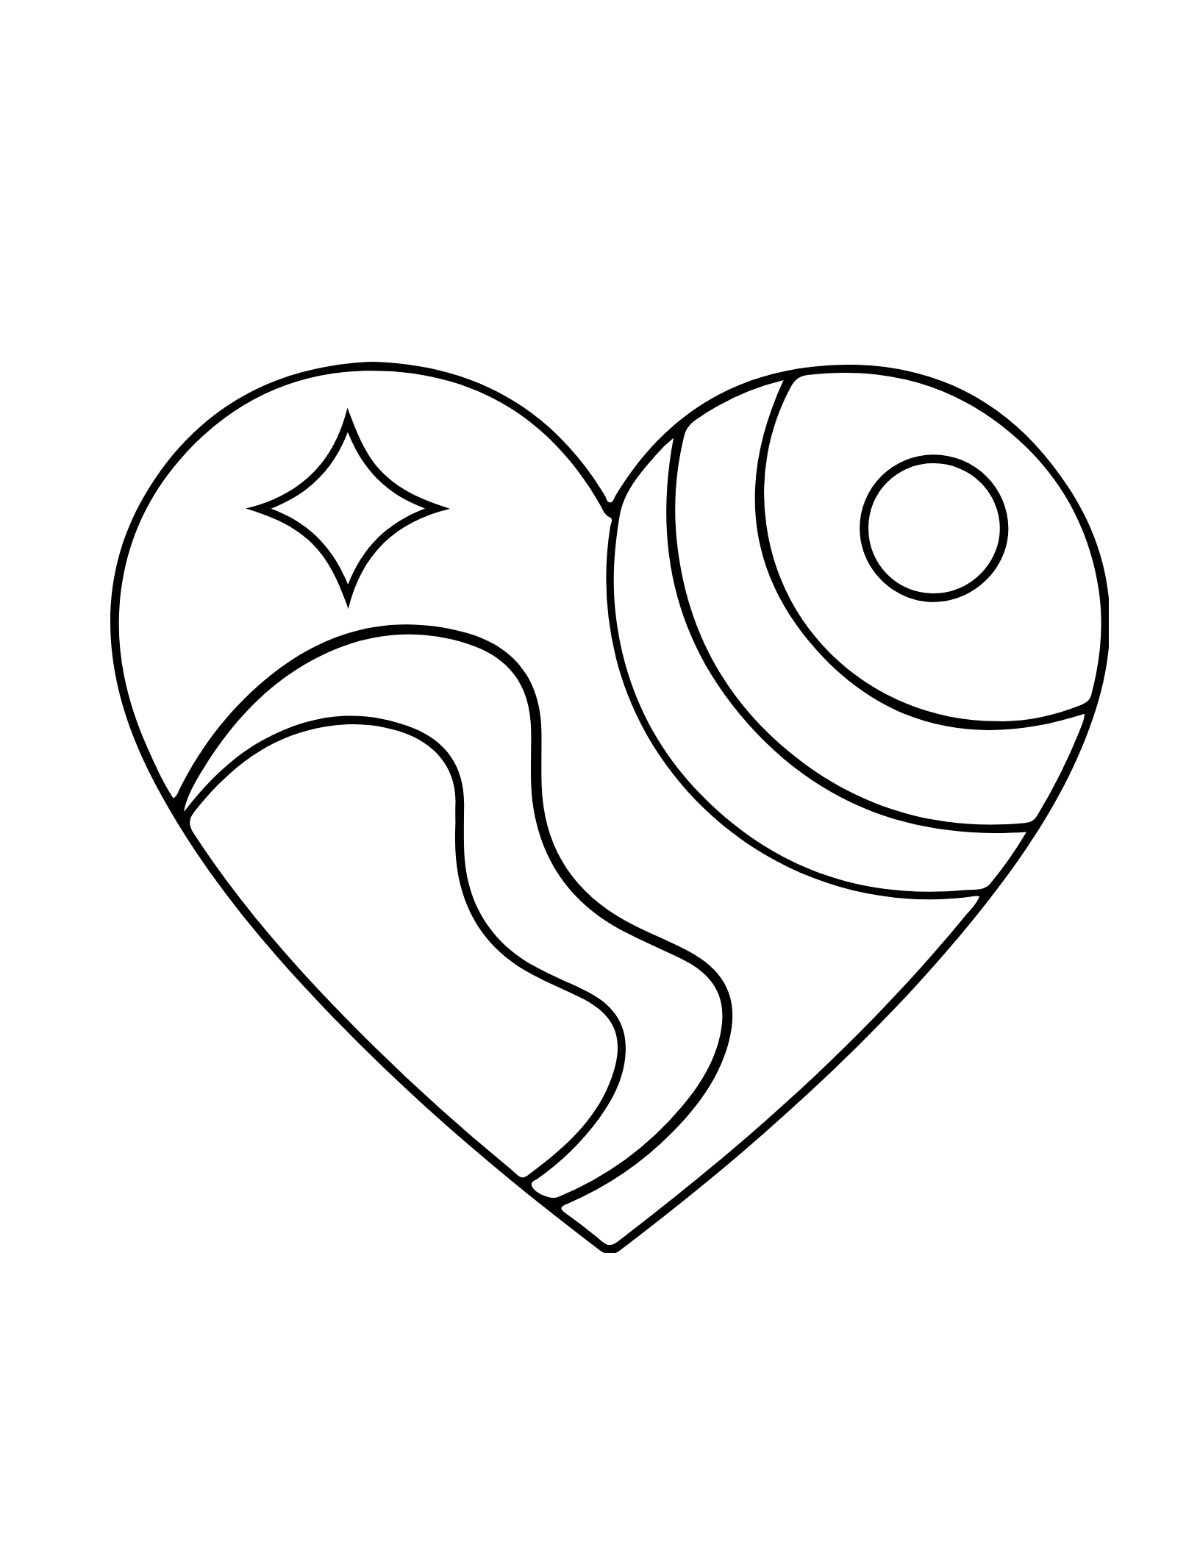 Ornate Heart Coloring Page